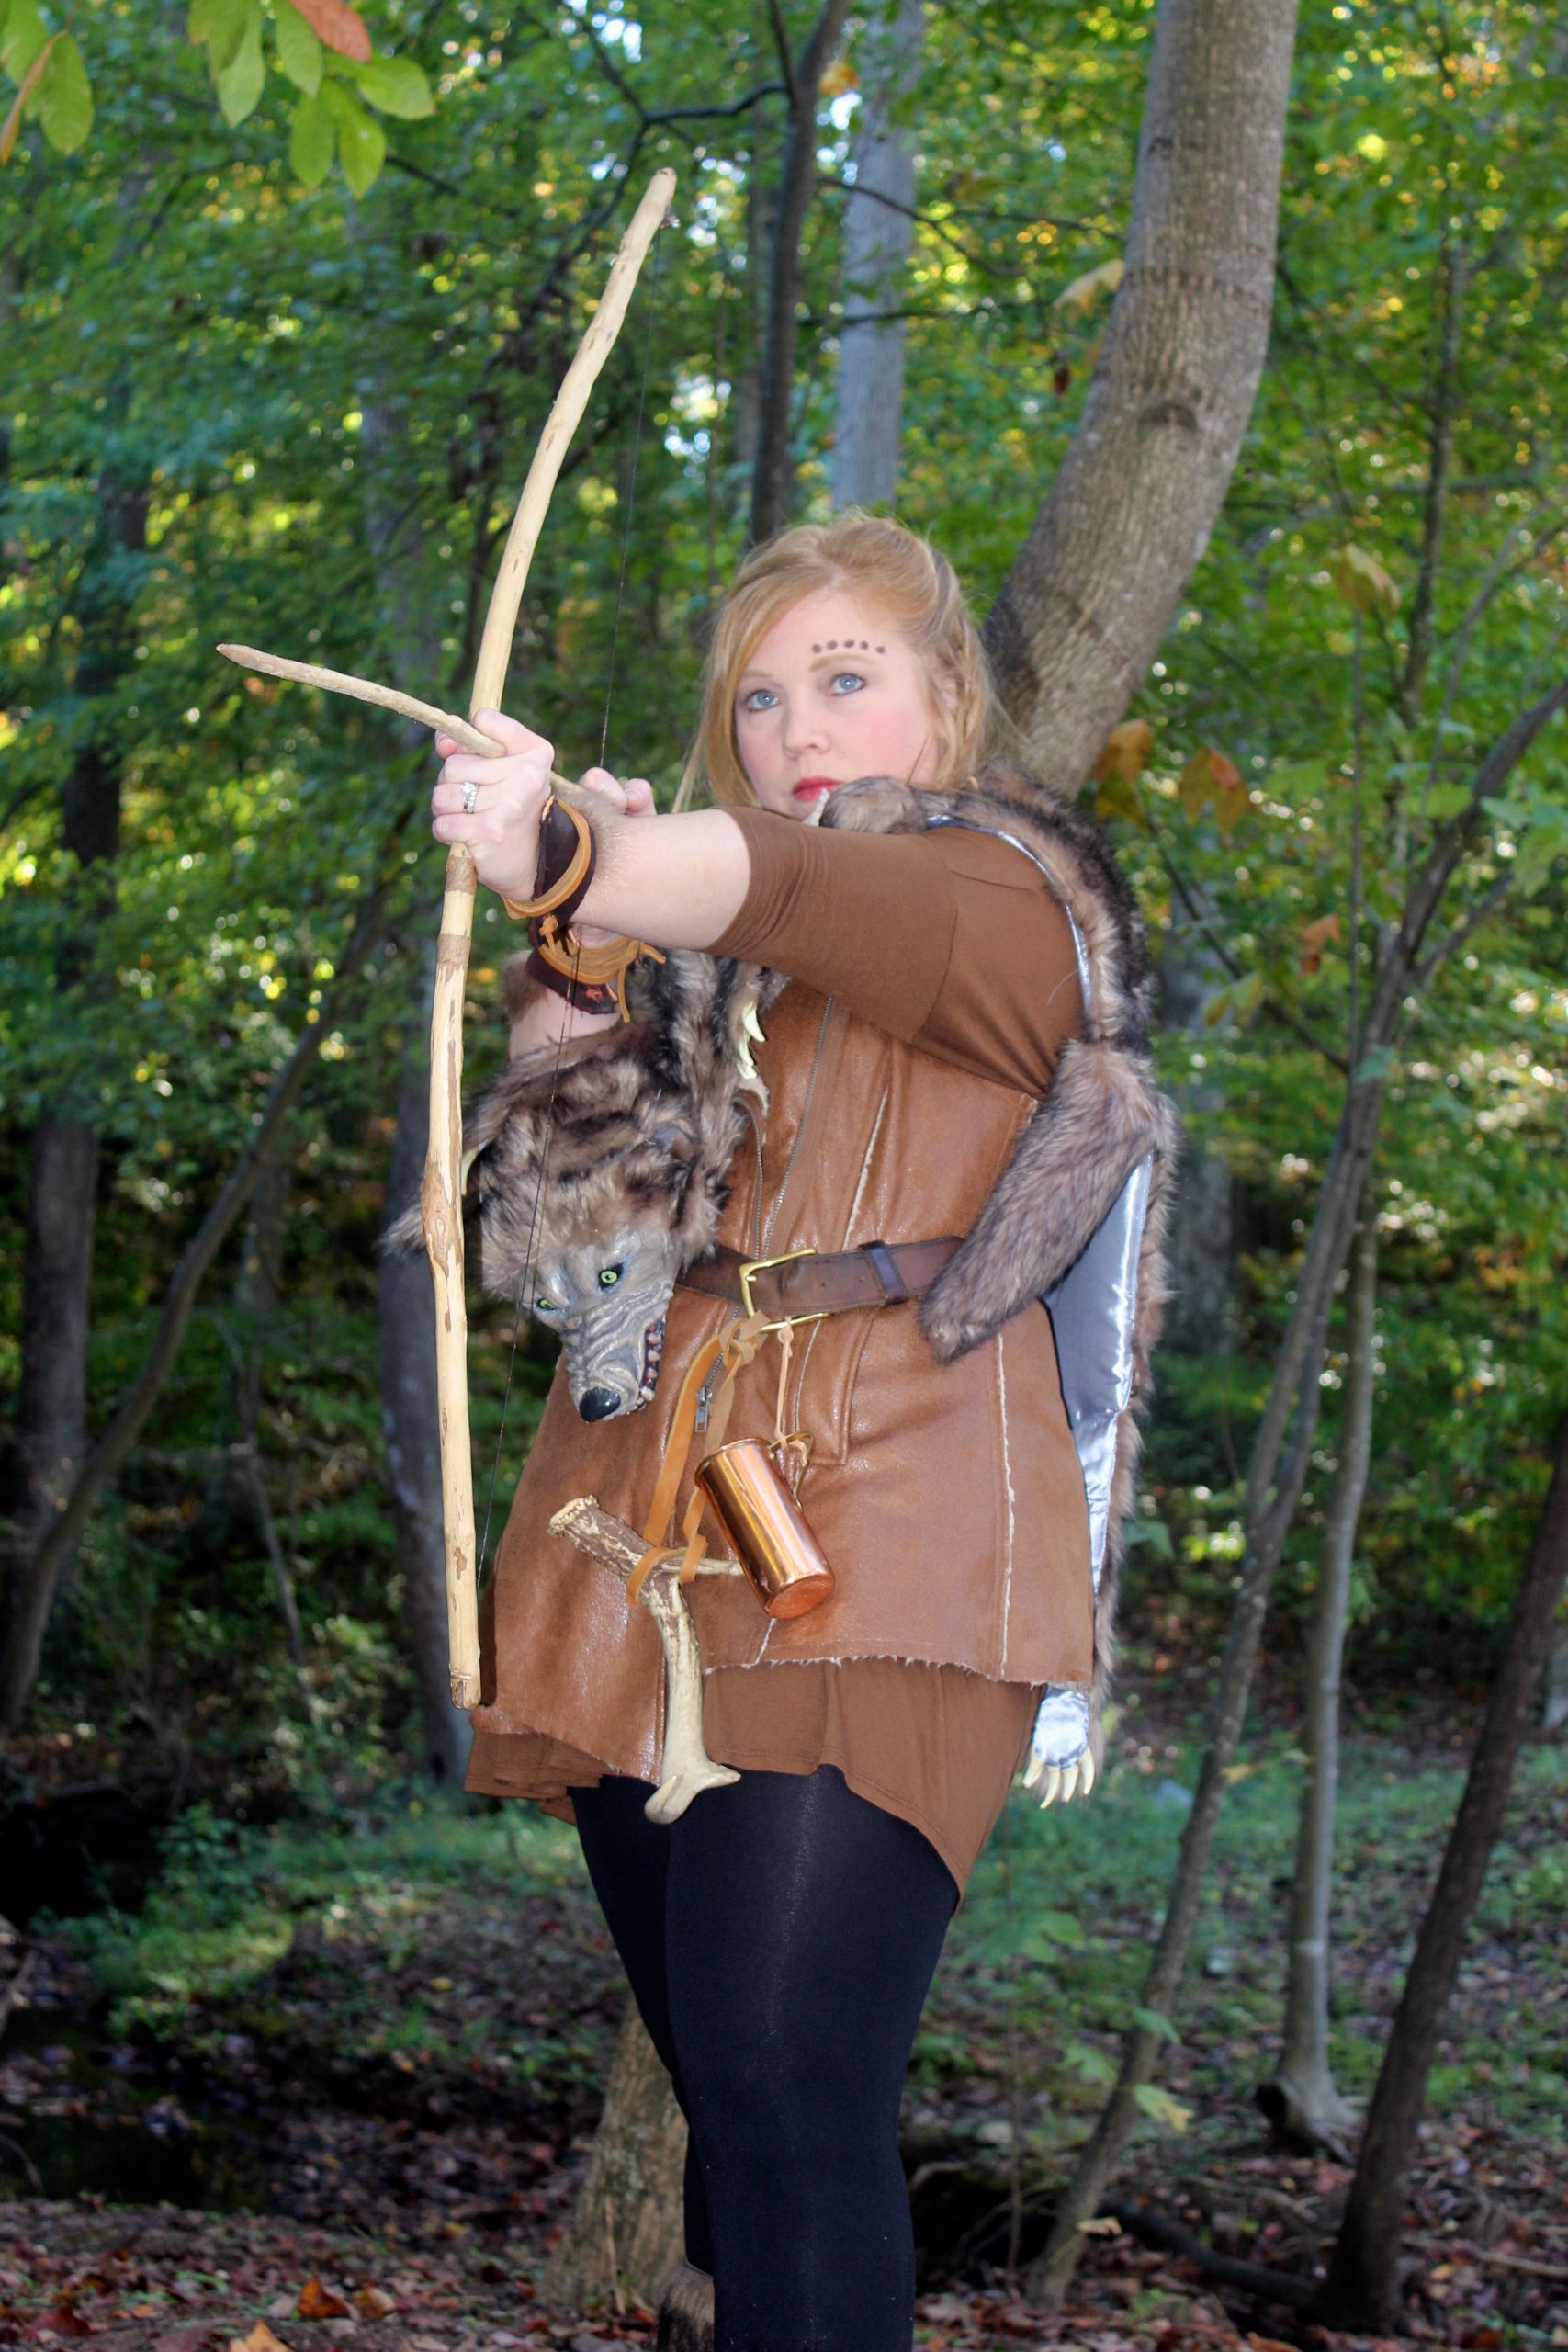 Leslie looked awesome in her Game of Thrones costume complete with fake wolf and bow and arrow.